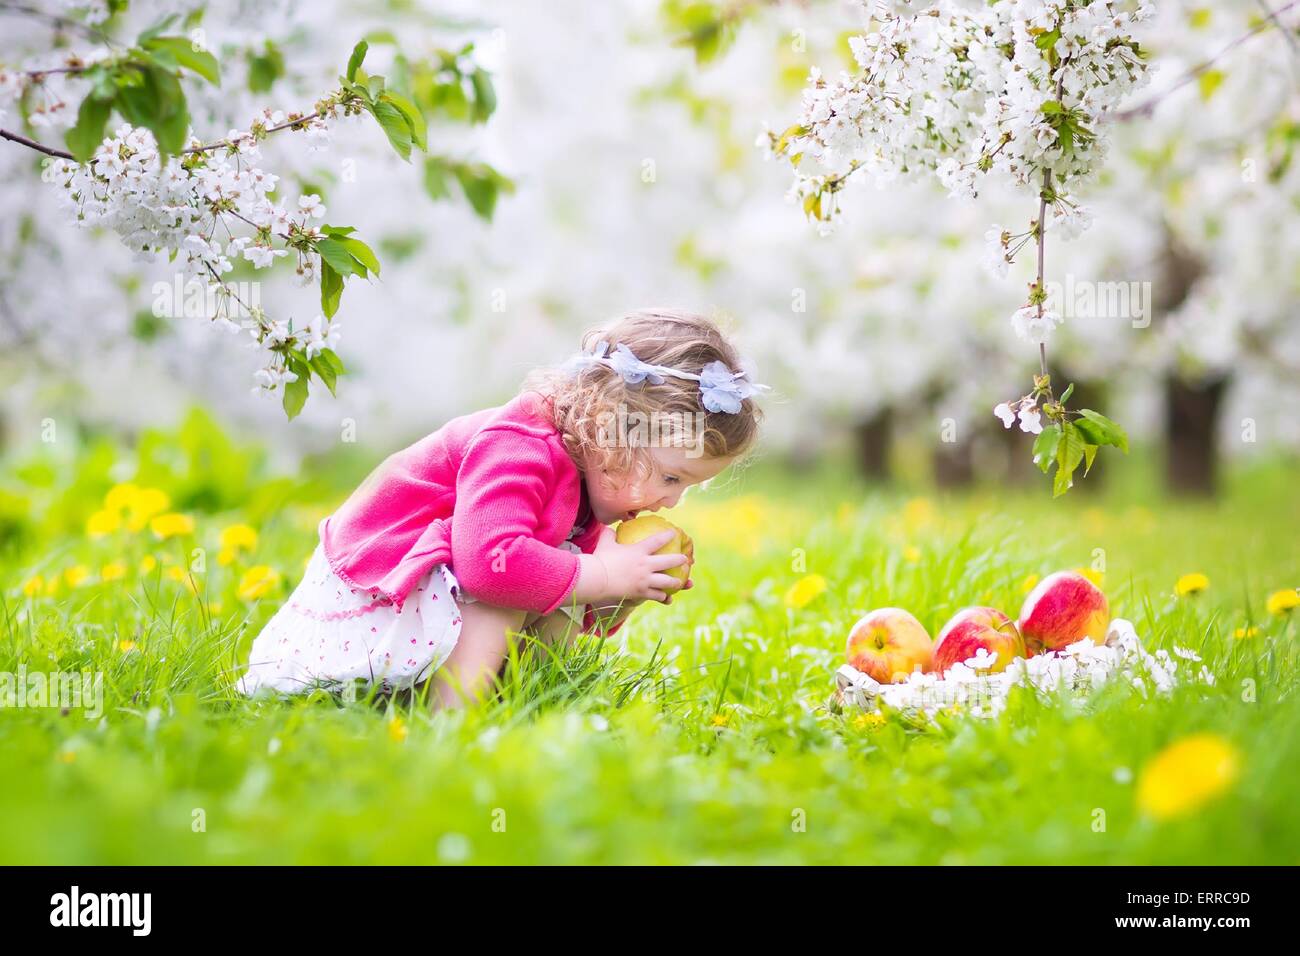 Adorable happy toddler girl with curly hair and flower crown wearing a red dress enjoying picnic in a blooming fruit garden Stock Photo